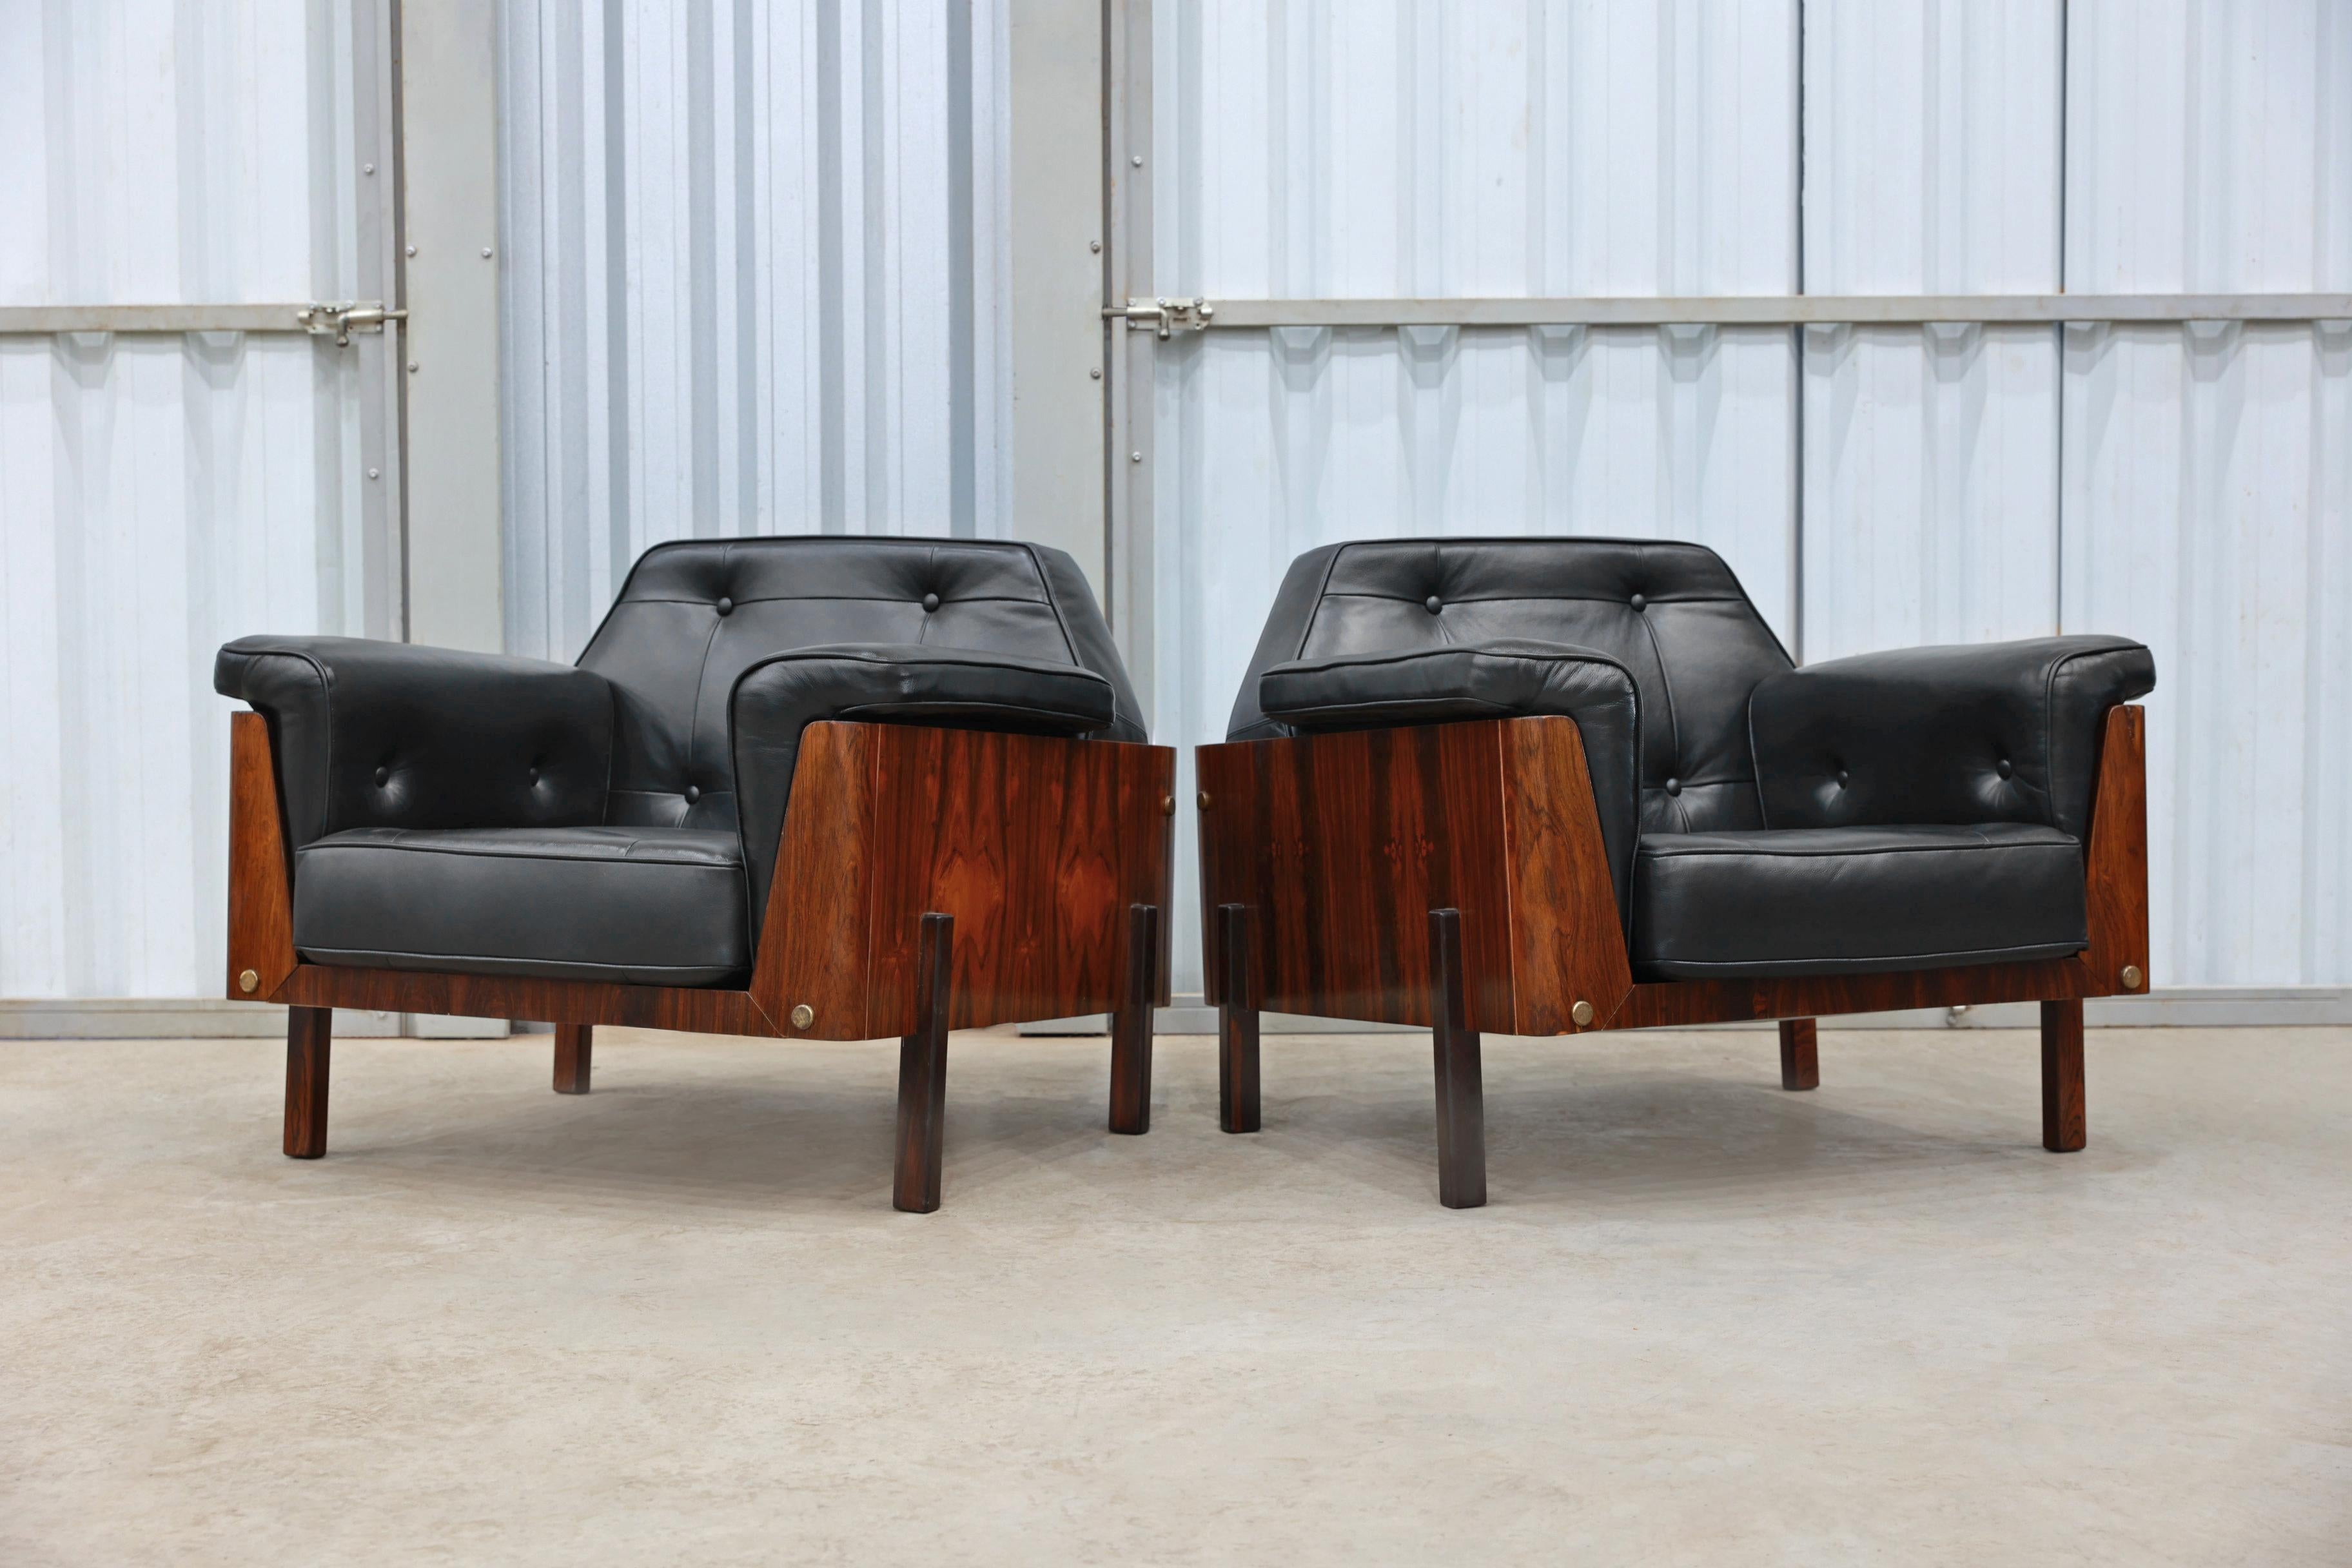 Brazilian Mid-Century Modern Armchairs in Rosewood & Black Leather by Bertomeu, Brazil For Sale